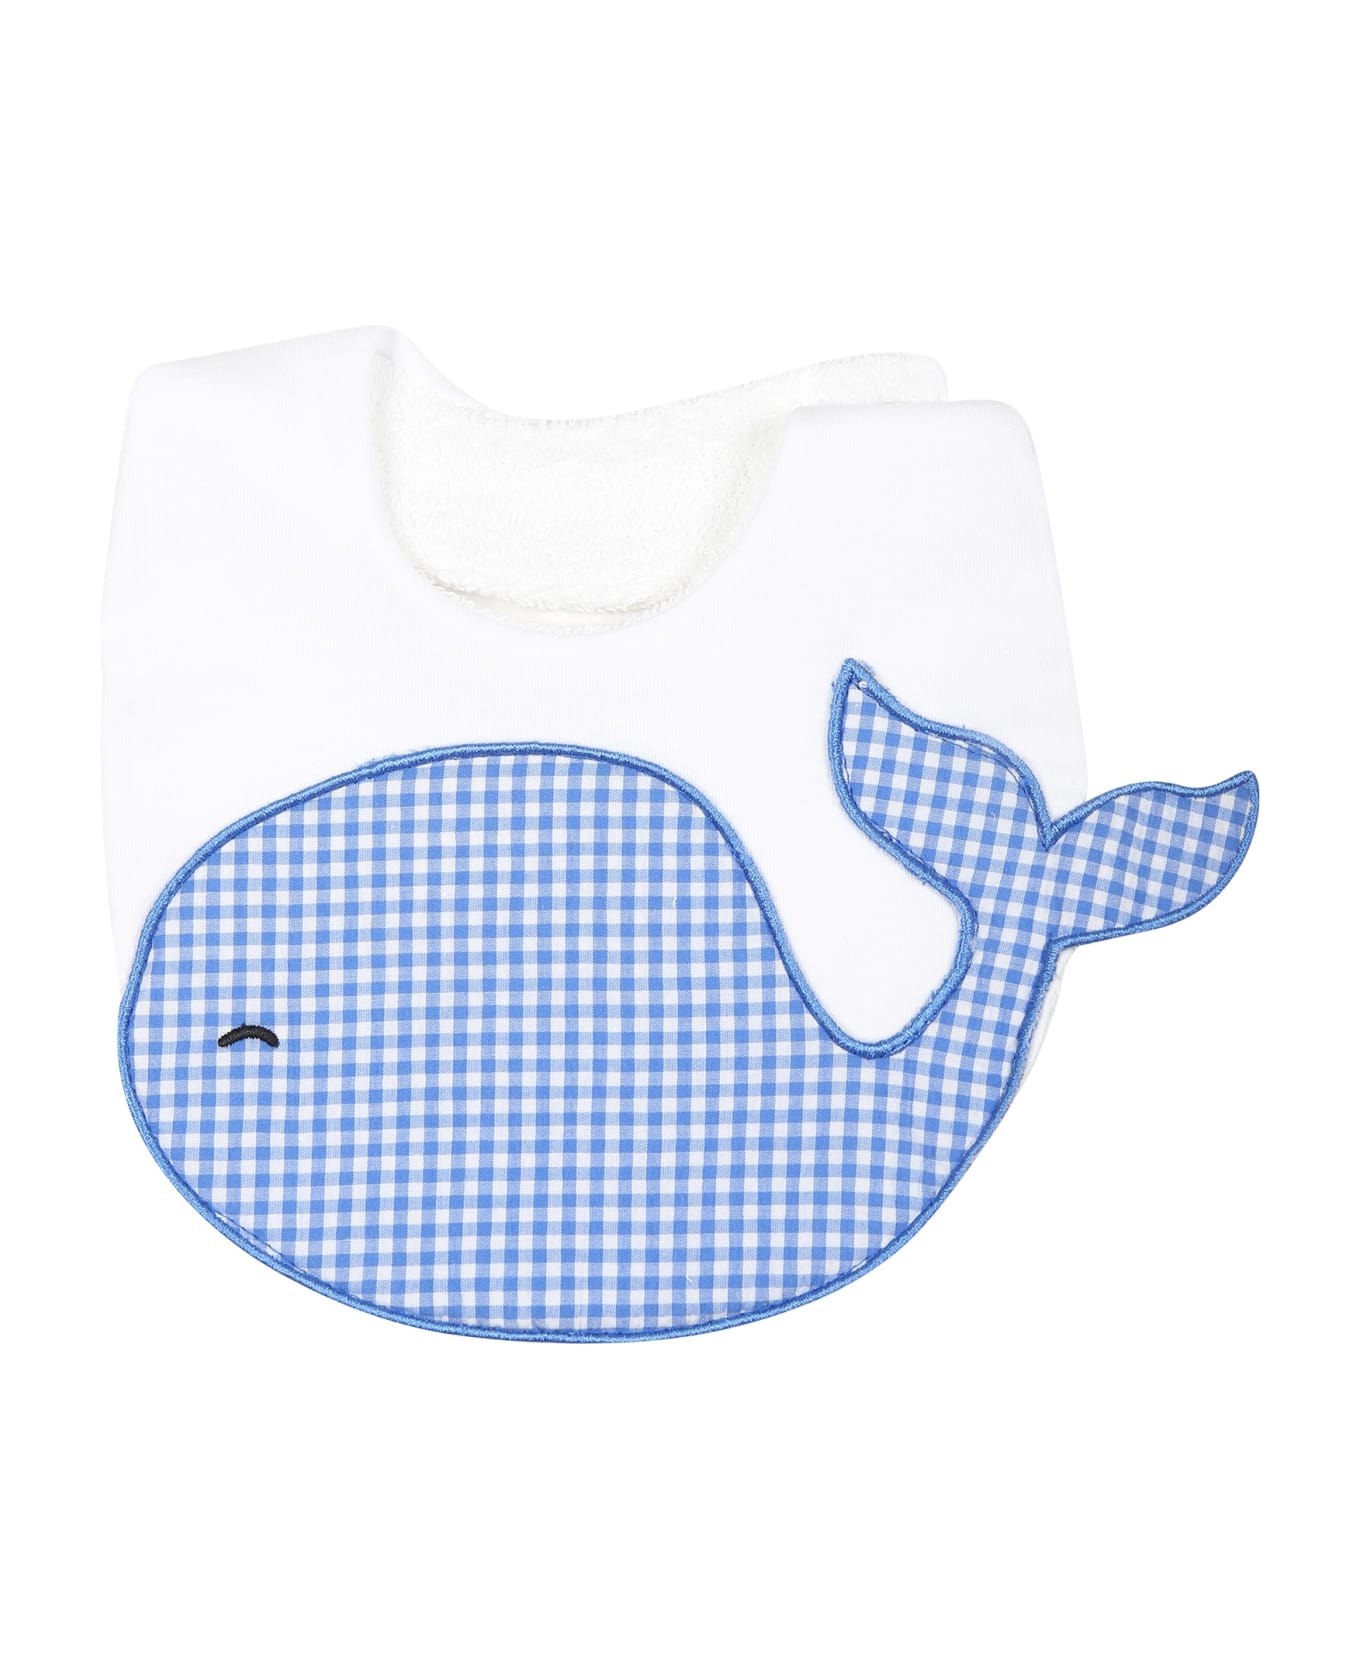 Monnalisa White Bib For Baby Boy With Whale - White アクセサリー＆ギフト